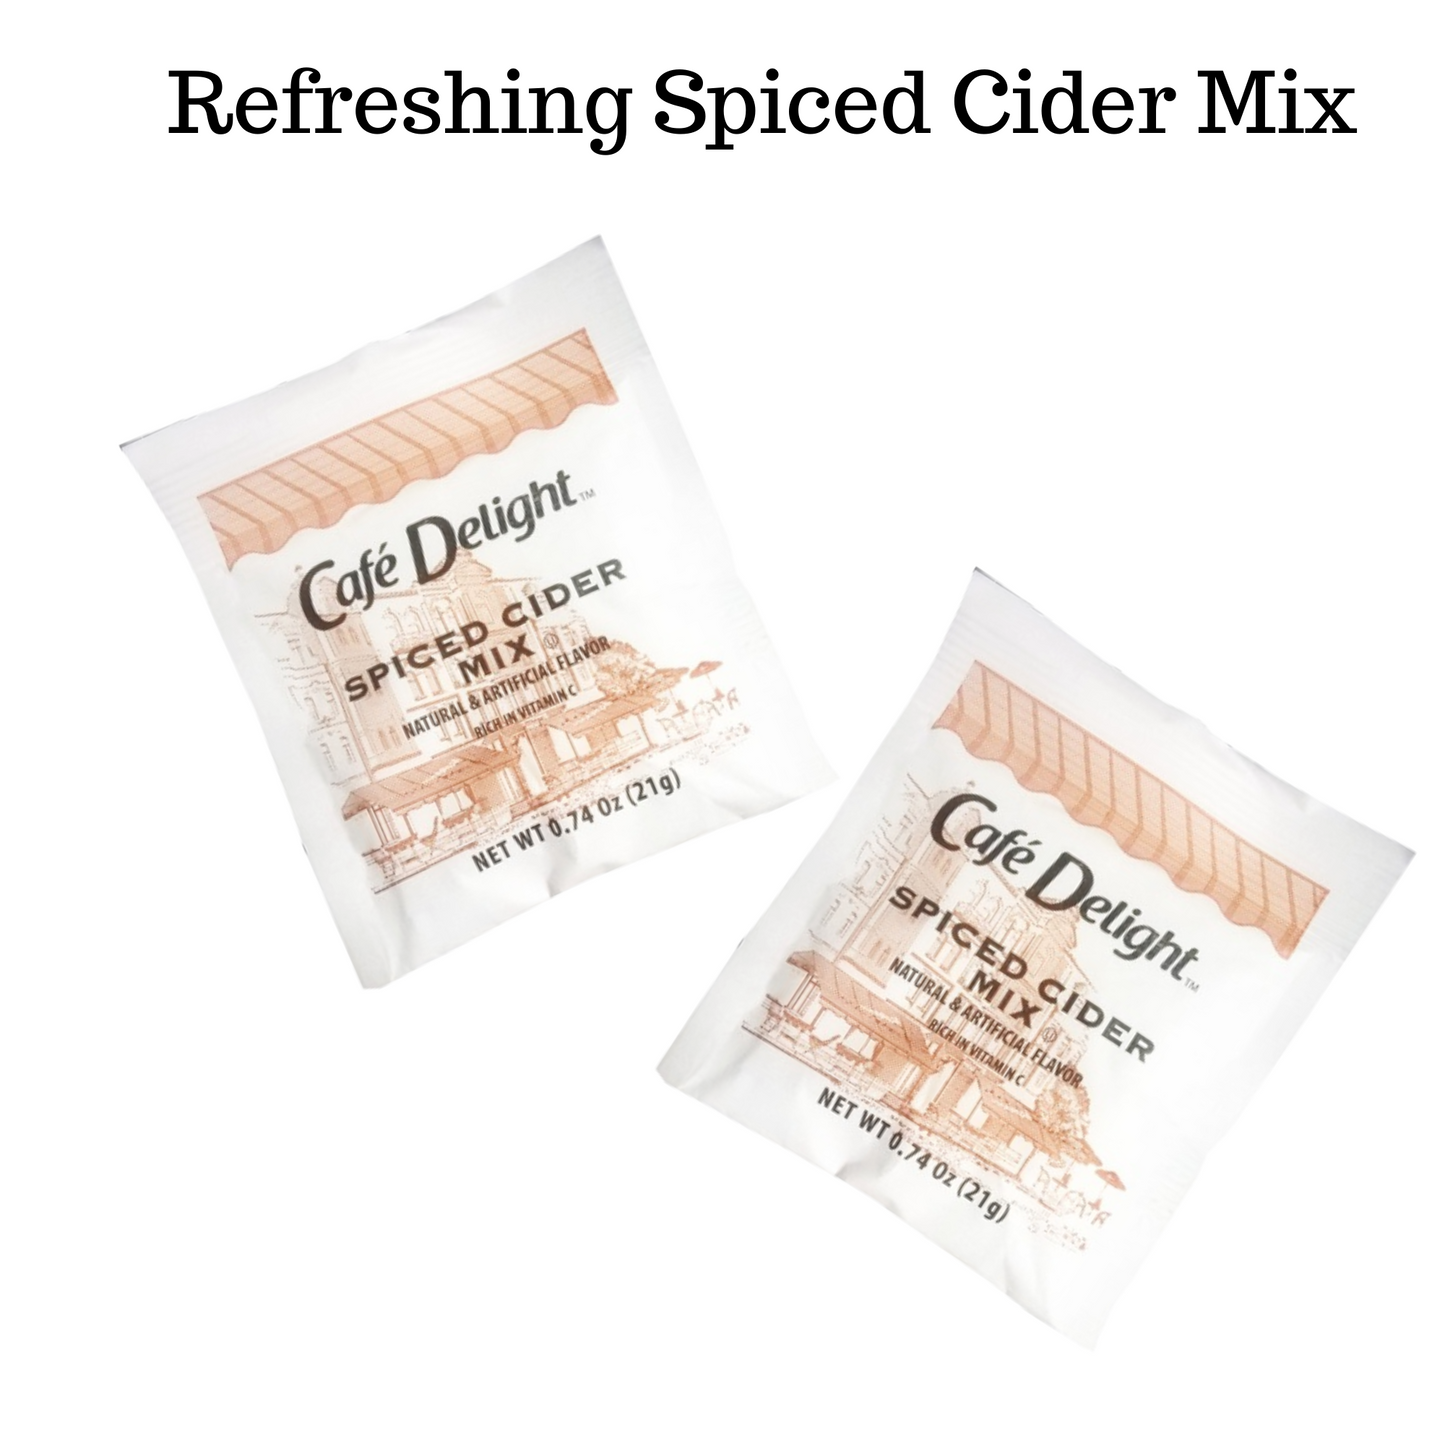 cider-mix- hey-you-gift-box